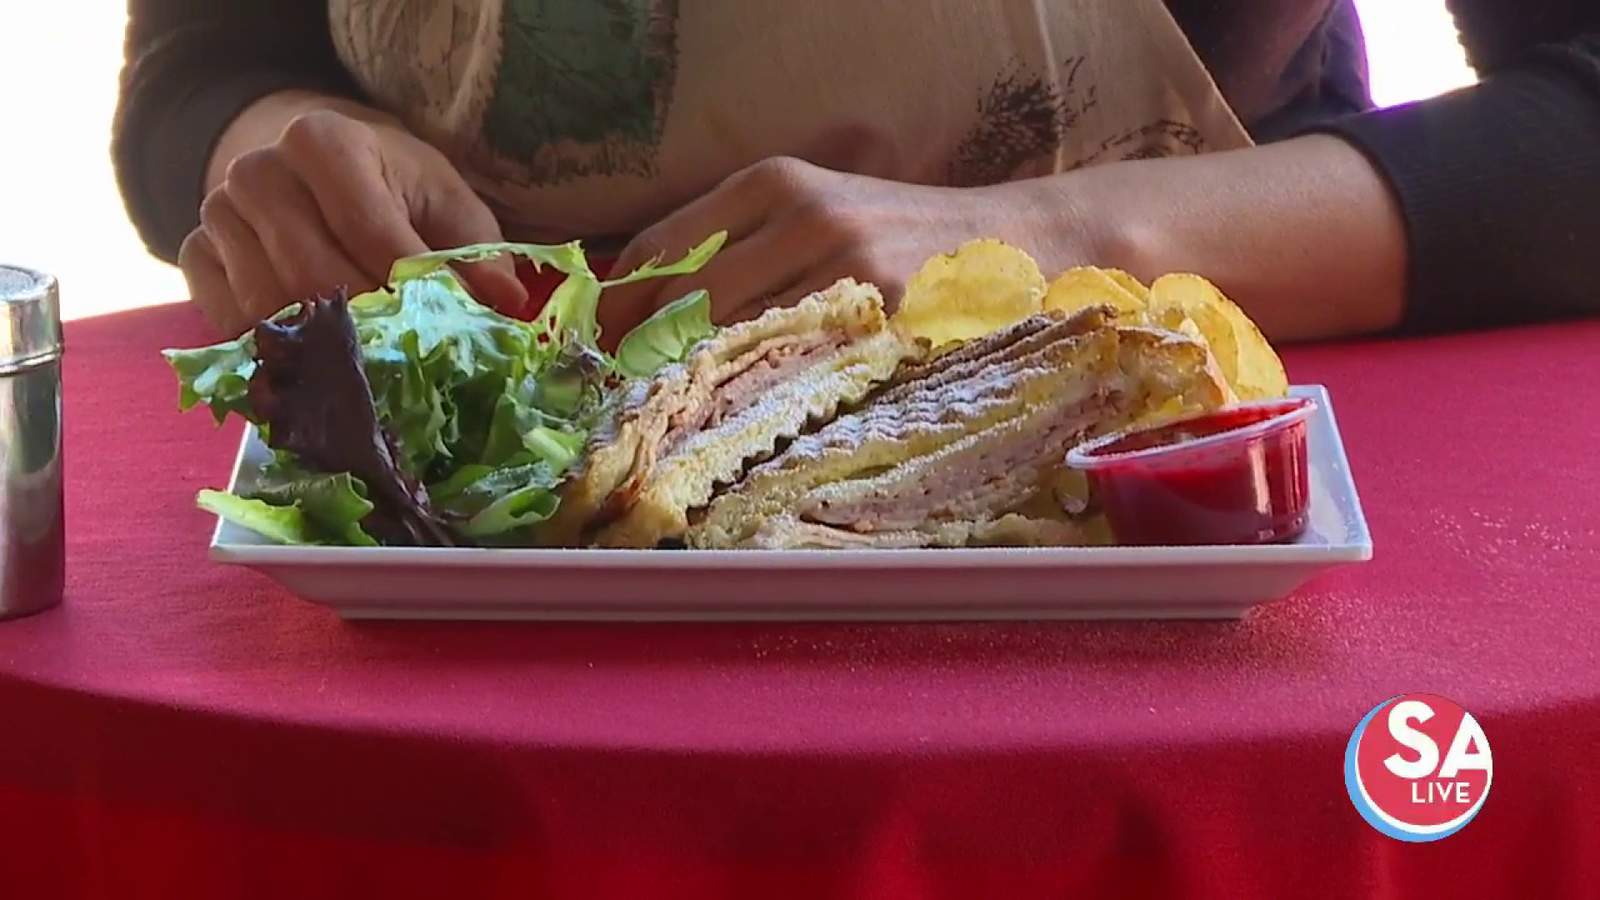 Healthier Monte Cristo: Secret way to make this comfort food better for you